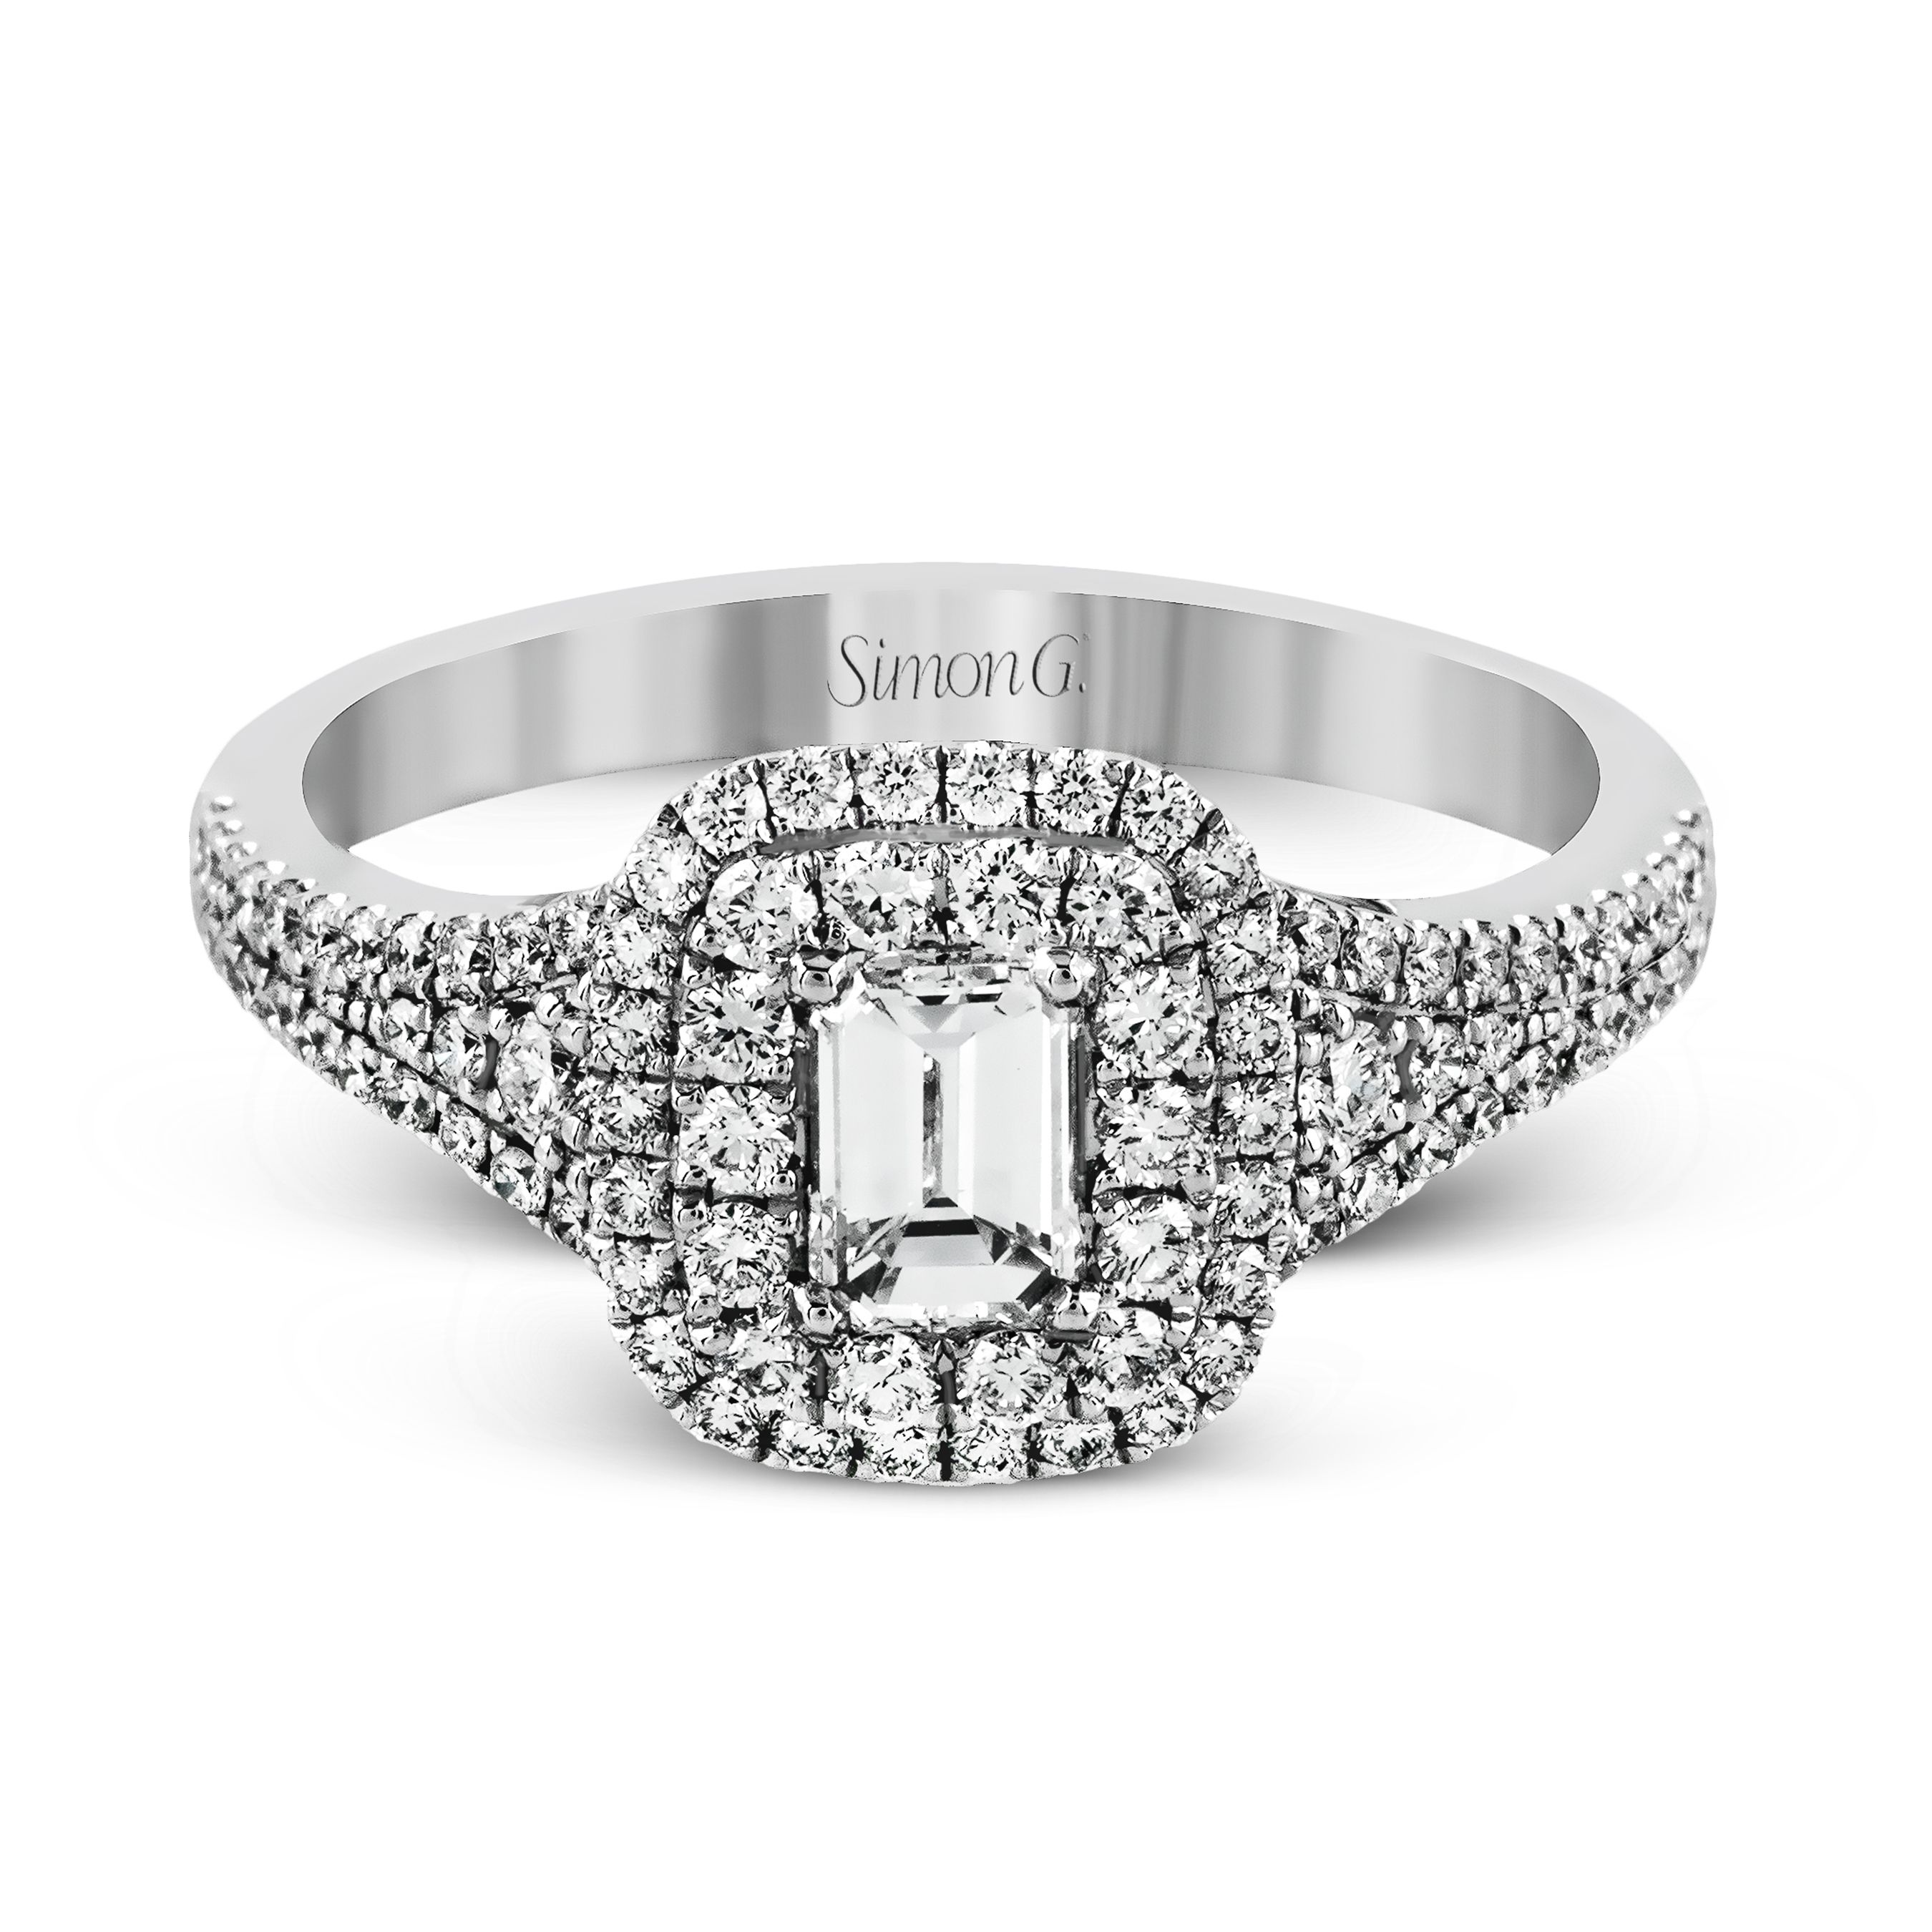 MR2274 Passion Collection White Gold Emerald Cut Engagement Ring